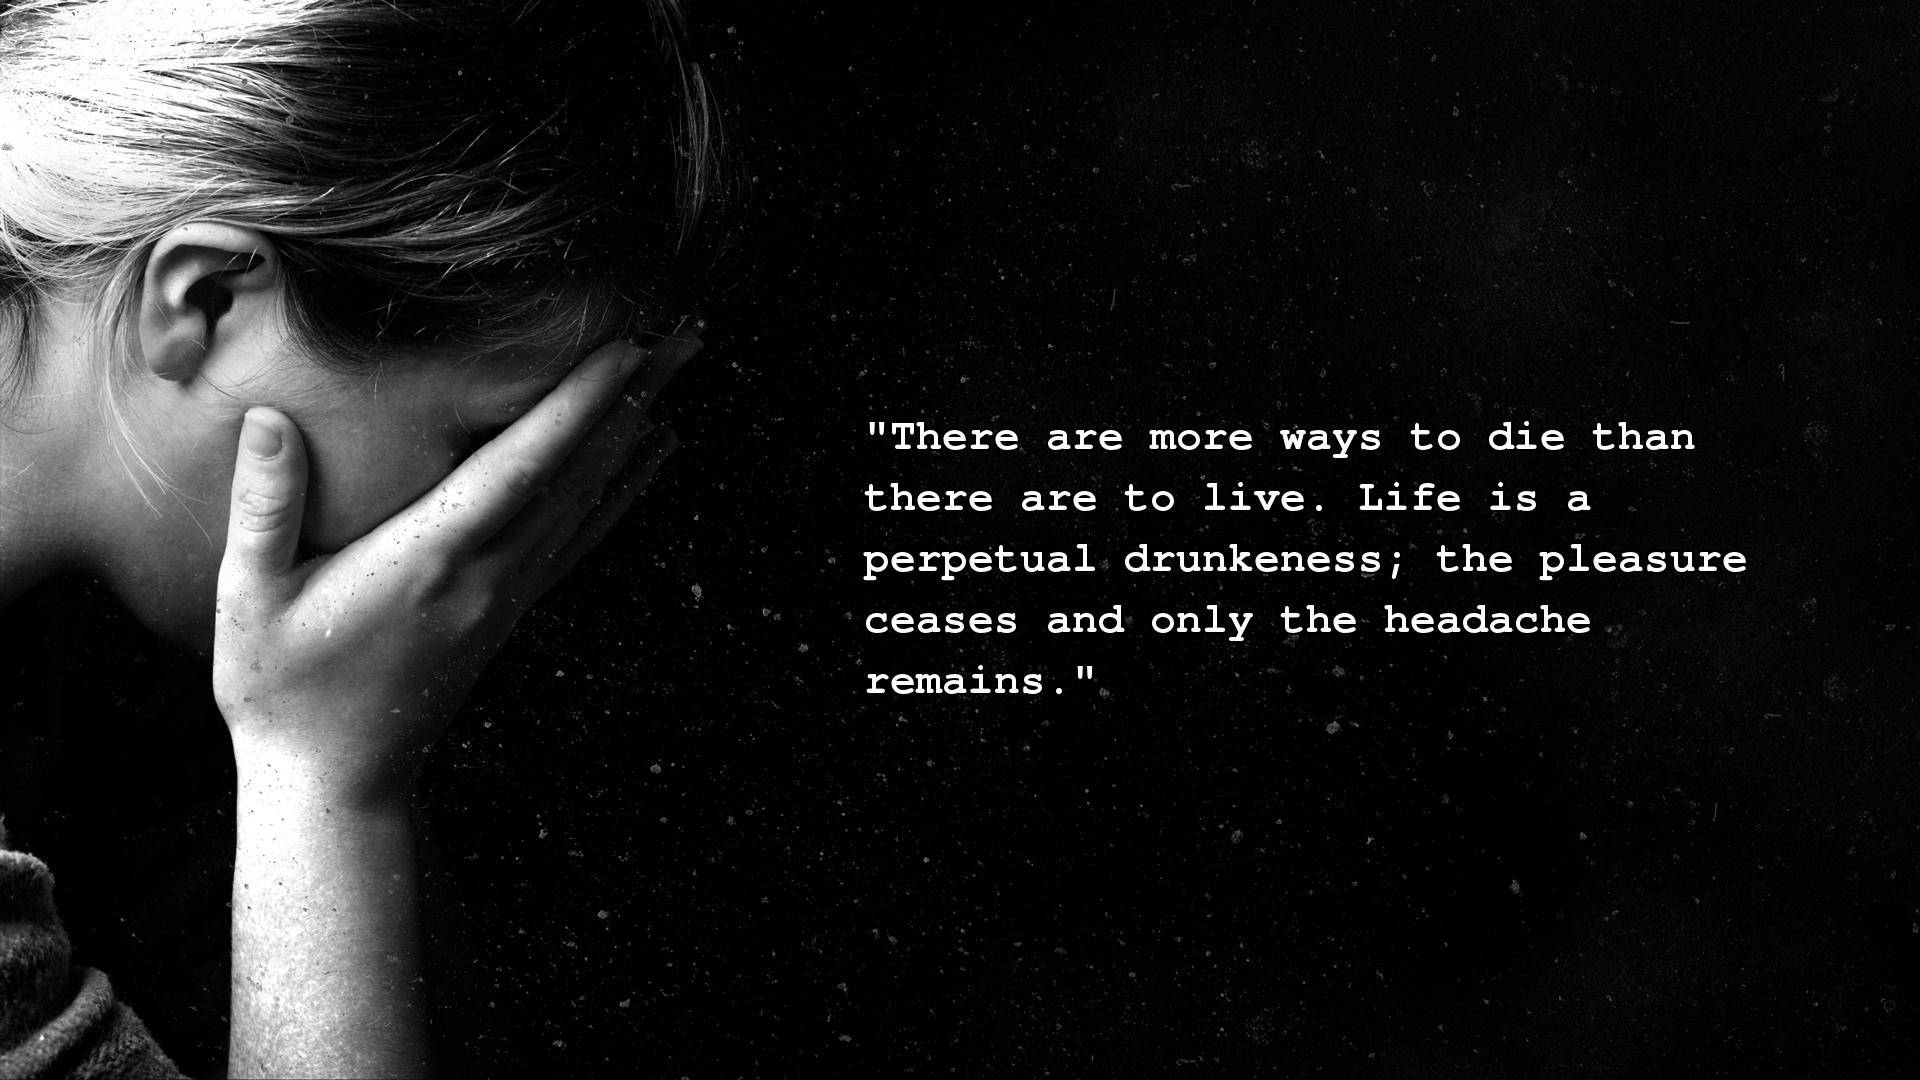 Crying Woman With Depressing Quote Background